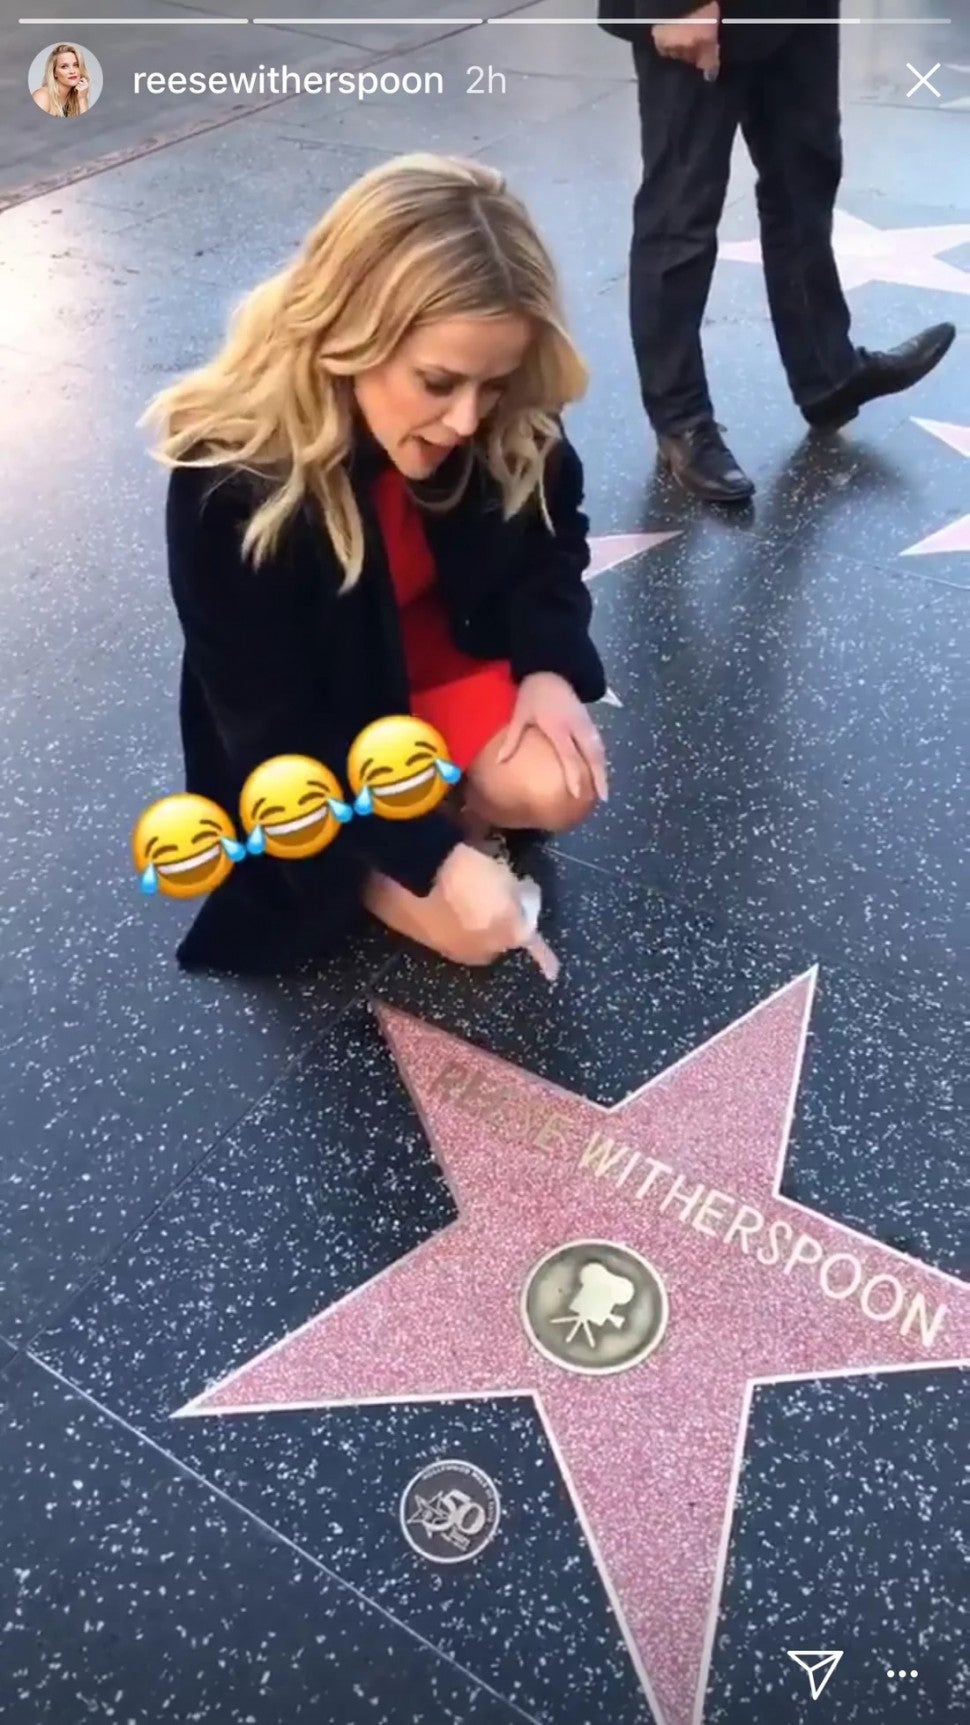 Reese Witherspoon at her Walk of Fame Star 2018